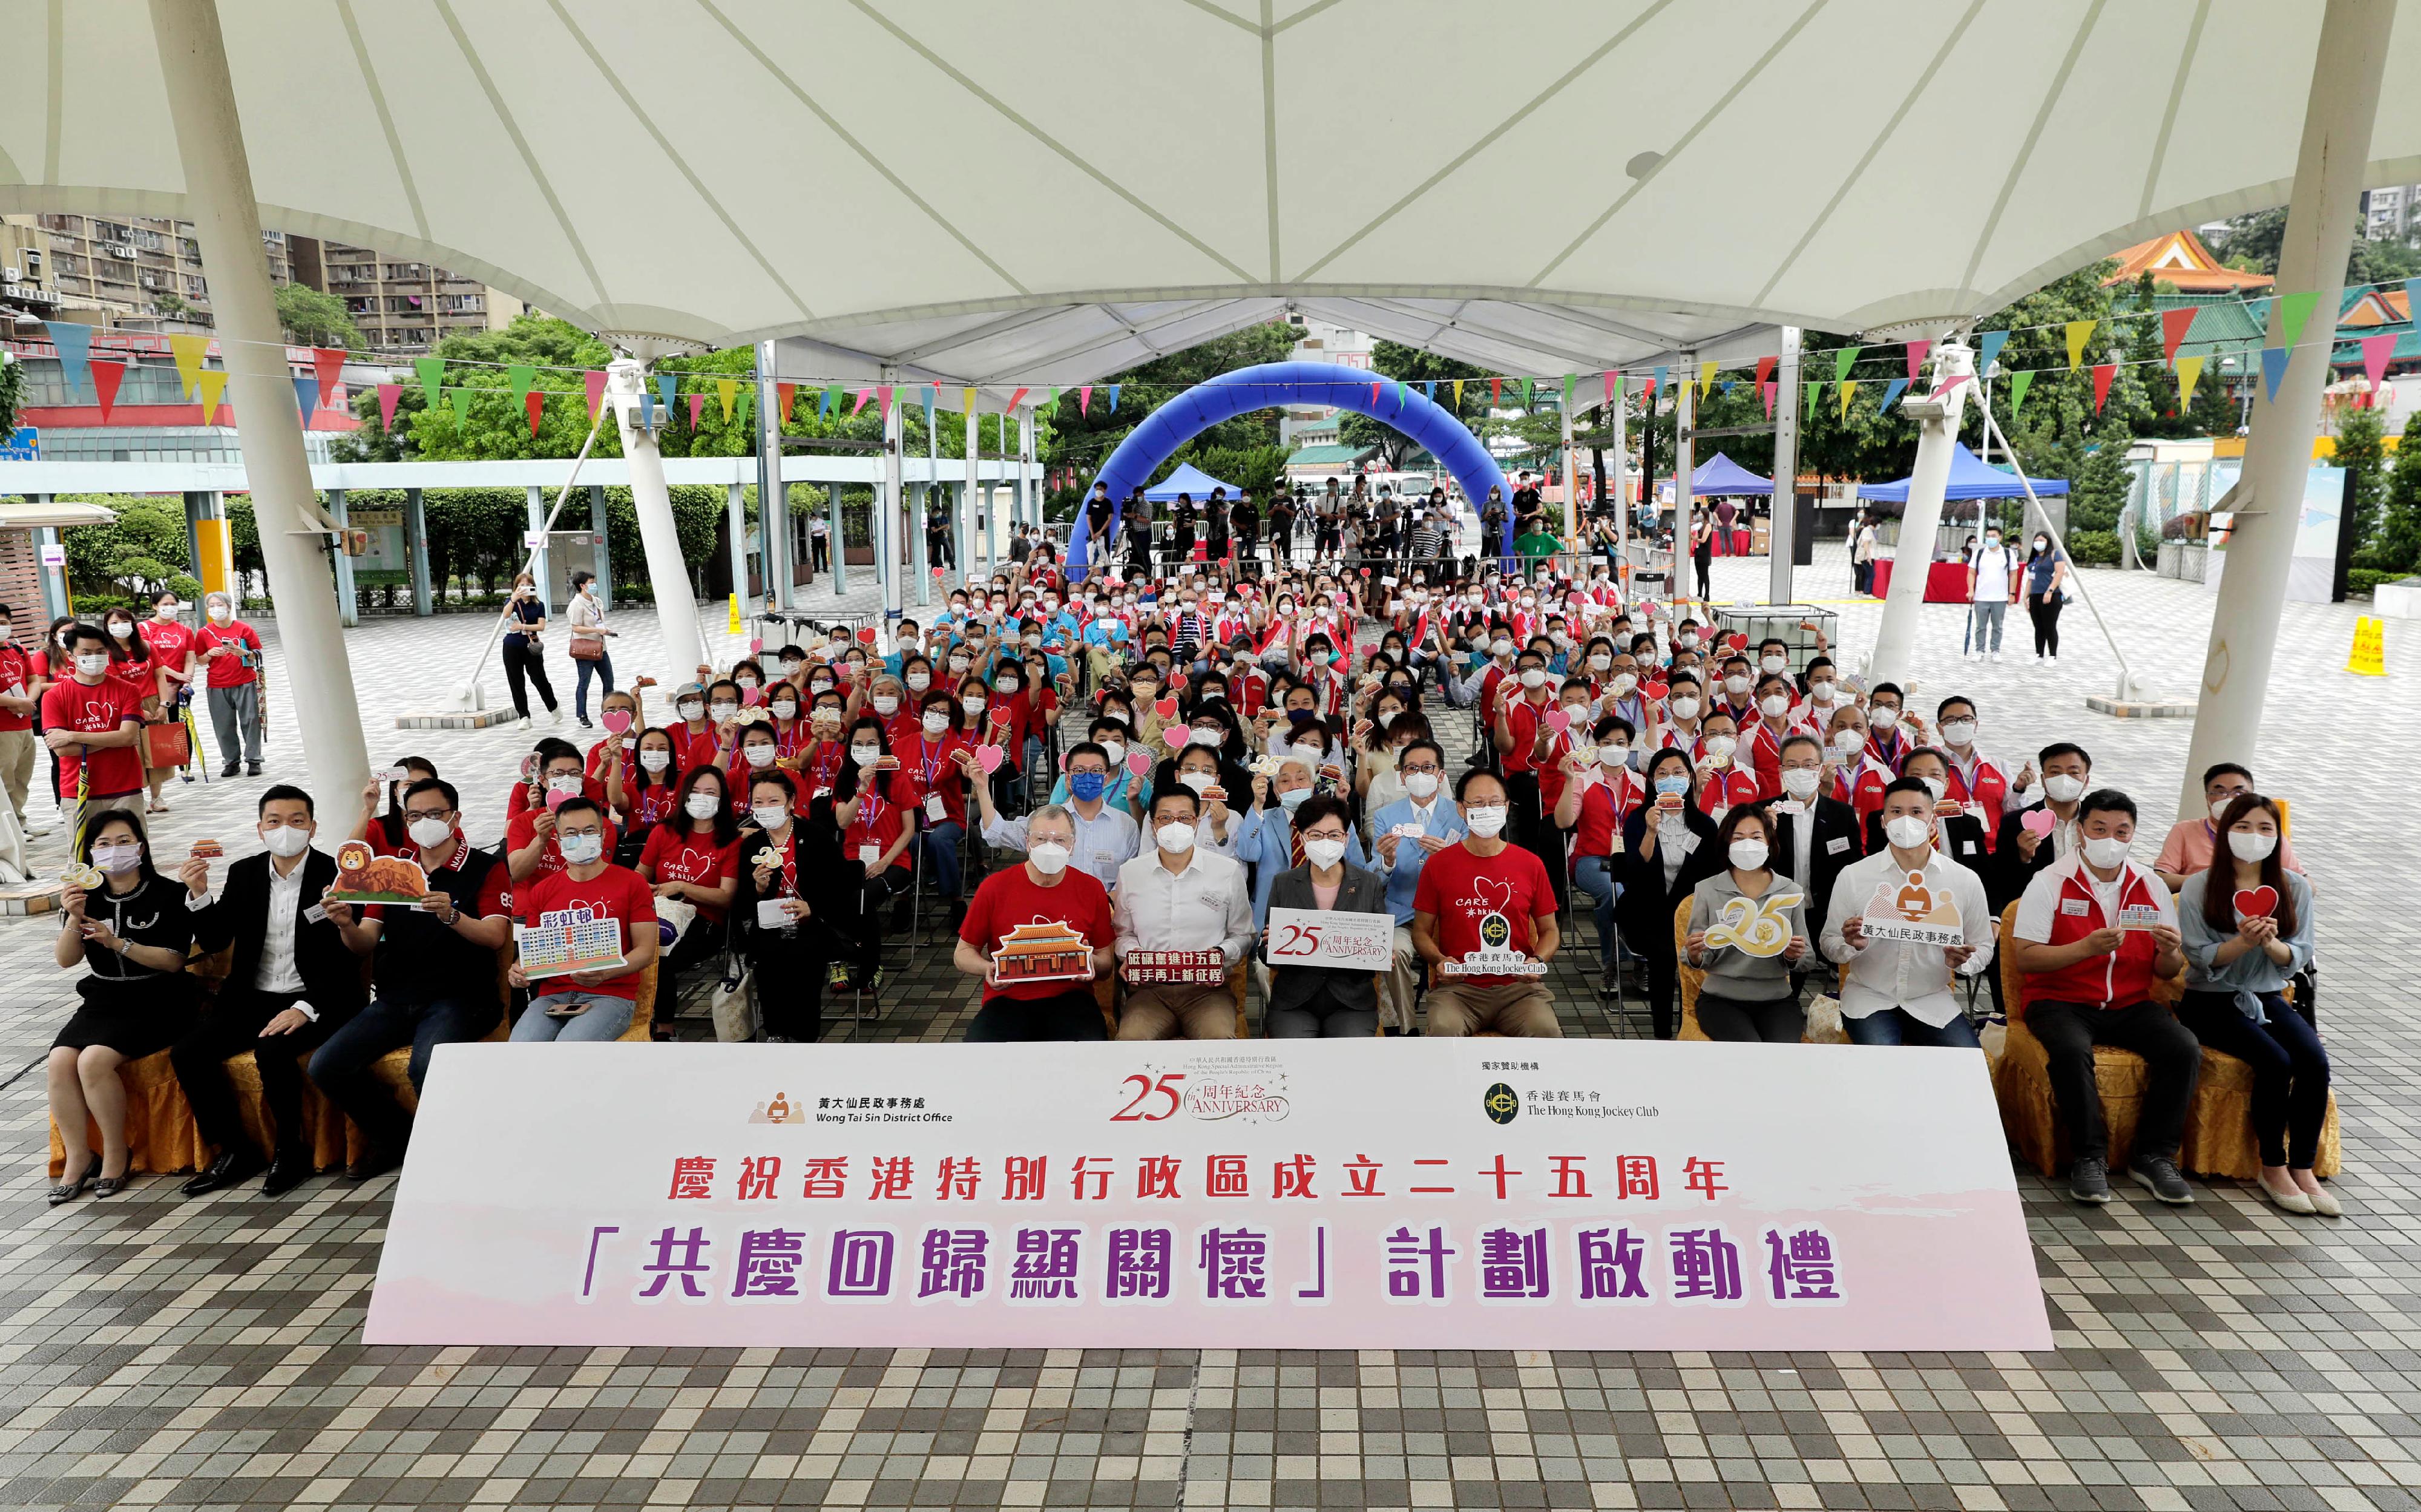 The launch ceremony of the Celebrations for All project, which is co-ordinated by the Home Affairs Department (HAD), was held in Wong Tai Sin District today (June 11). Photo shows the Chief Executive, Mrs Carrie Lam (seventh left), the Acting Secretary for Home Affairs, Mr Jack Chan (sixth left); the Director of Home Affairs, Mrs Alice Cheung (fourth right); the Chairman of the Hong Kong Jockey Club, Mr Philip Chen (fifth right); the Chief Executive Officer of the Hong Kong Jockey Club, Mr Winfried Engelbrecht-Bresges (fifth left); the Executive Director of Charities and Community of the Hong Kong Jockey Club, Mr Cheung Leong (fourth left) ; and the District Officer (Wong Tai Sin), Mr Steve Wong (third right), in a group photo with other participants at the ceremony. 